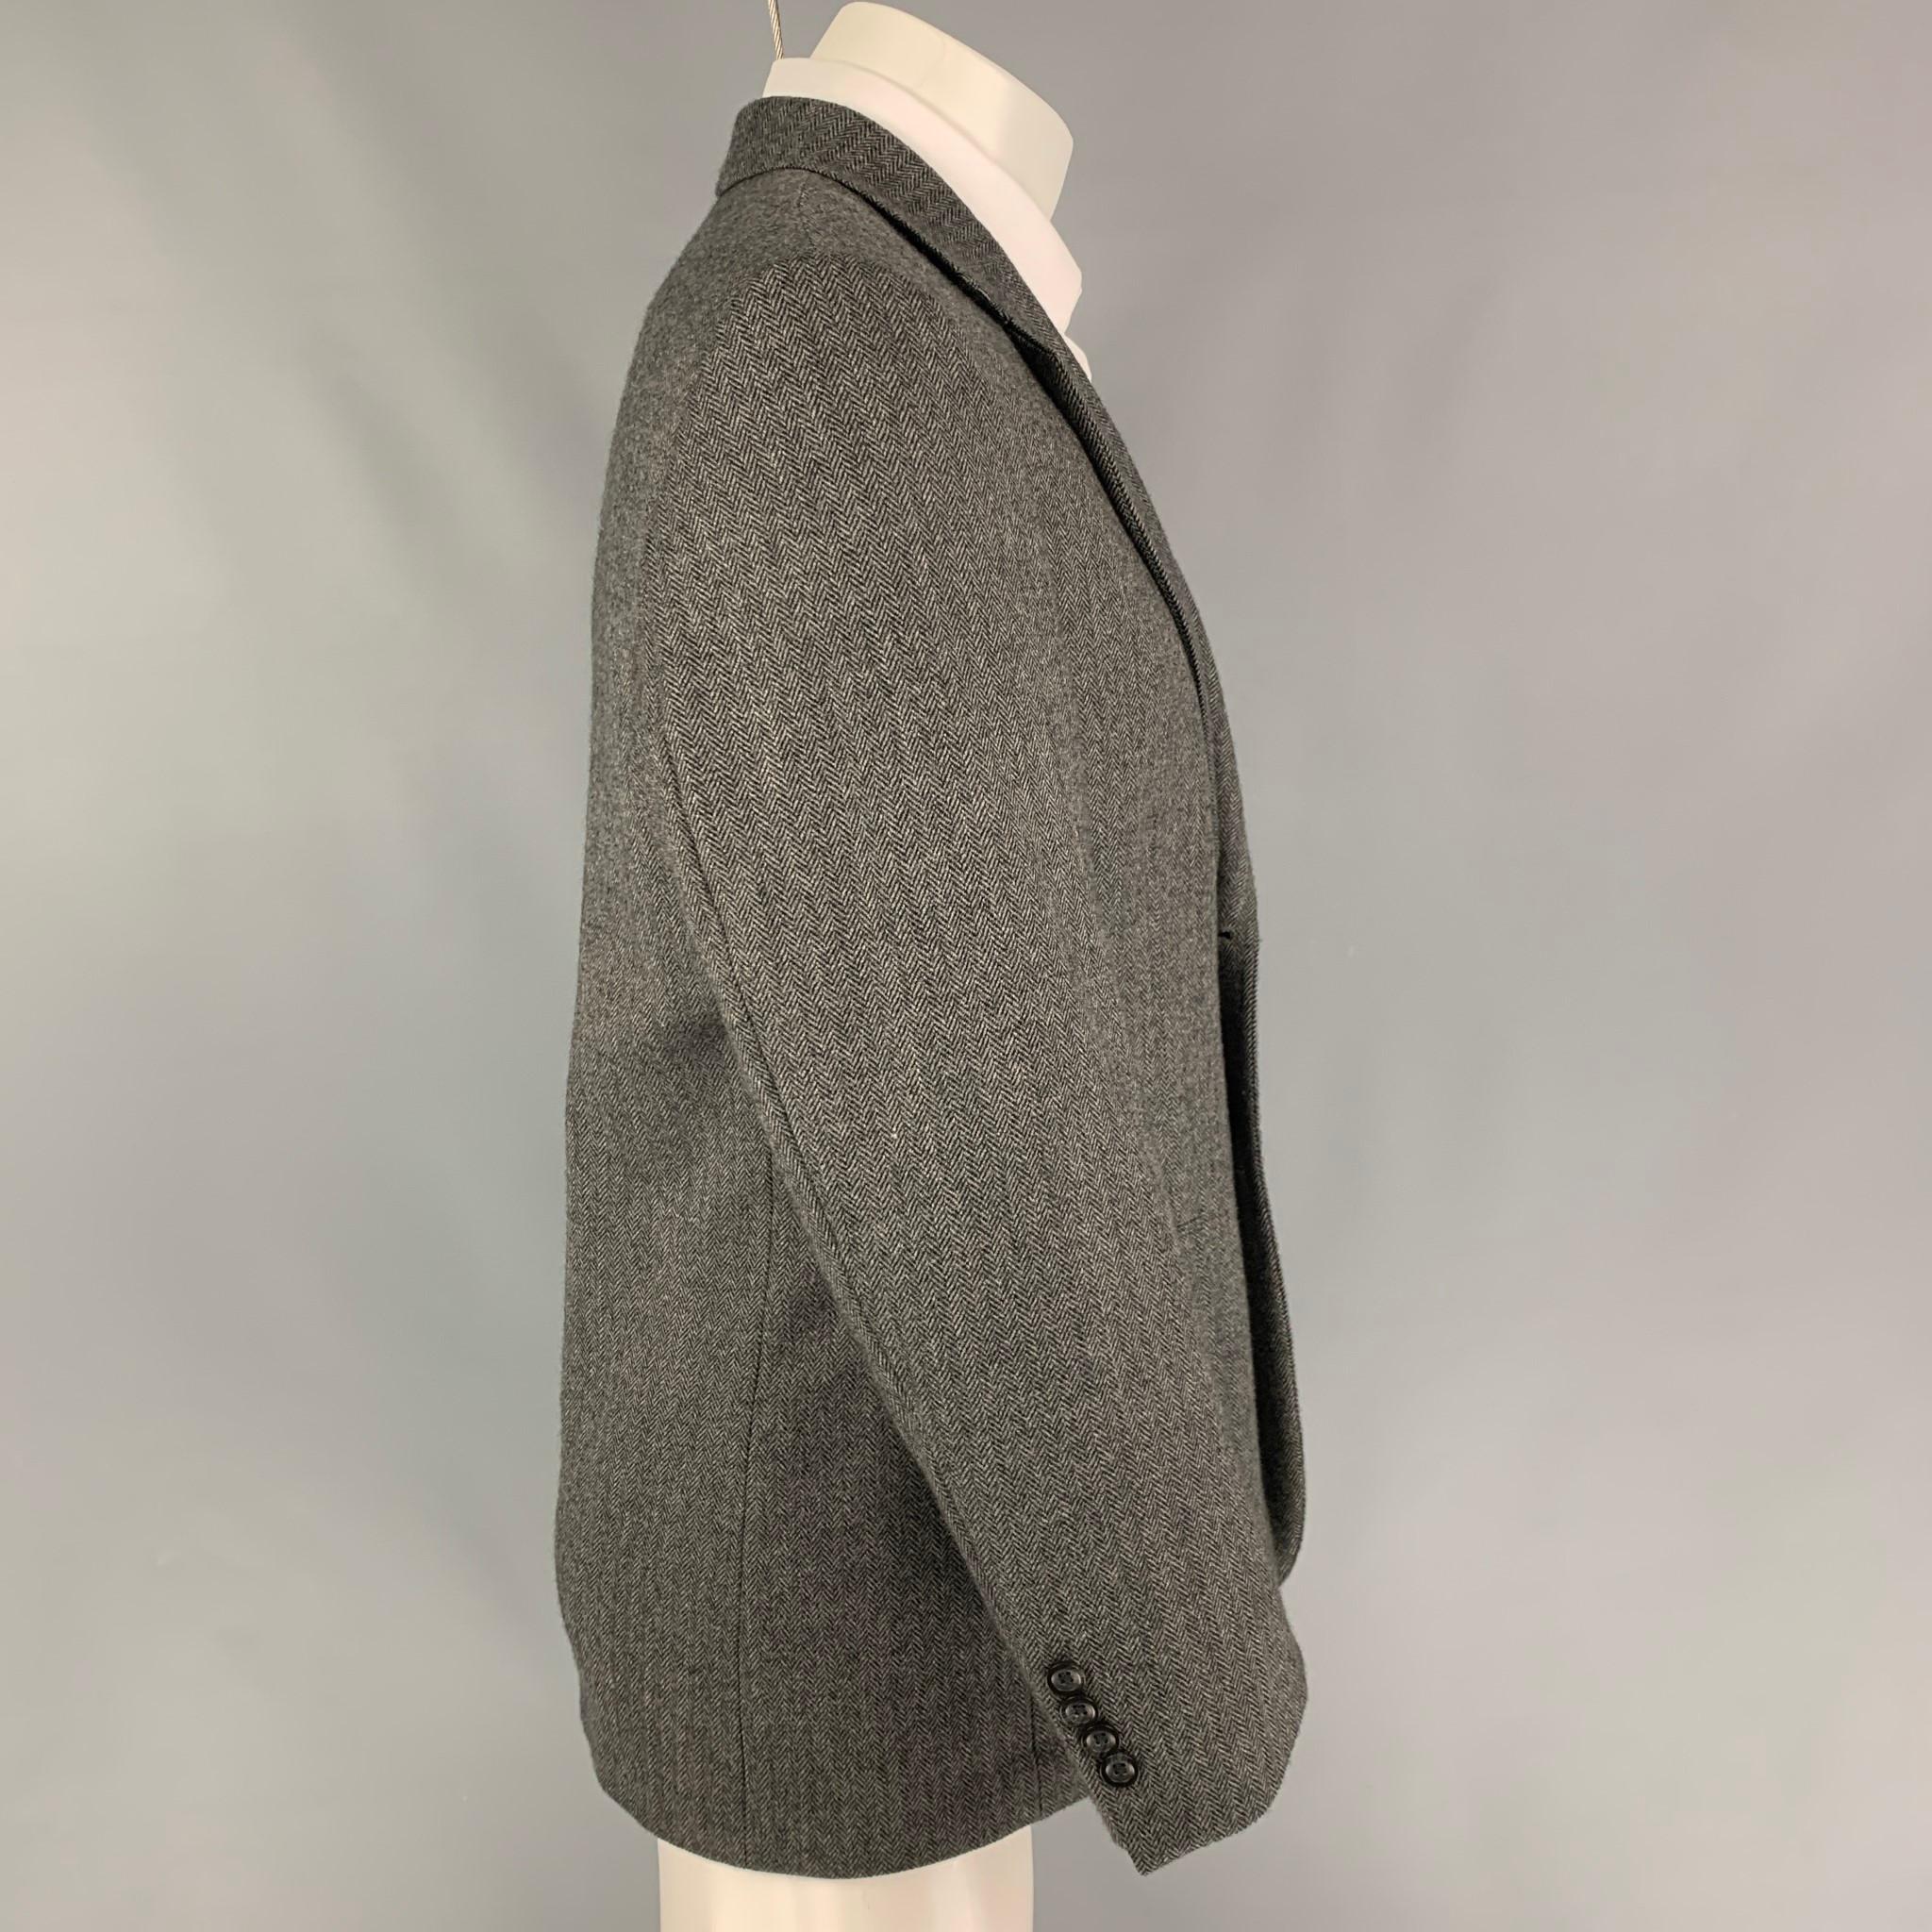 OSCAR DE LA RENTA sport coat comes in a grey & black herringbone wool featuring a notch lapel, flap pockets, and a double button closure. 

Very Good Pre-Owned Condition.
Marked: 38 S

Measurements:

Shoulder: 18.5 in.
Chest: 38 in.
Sleeve: 24